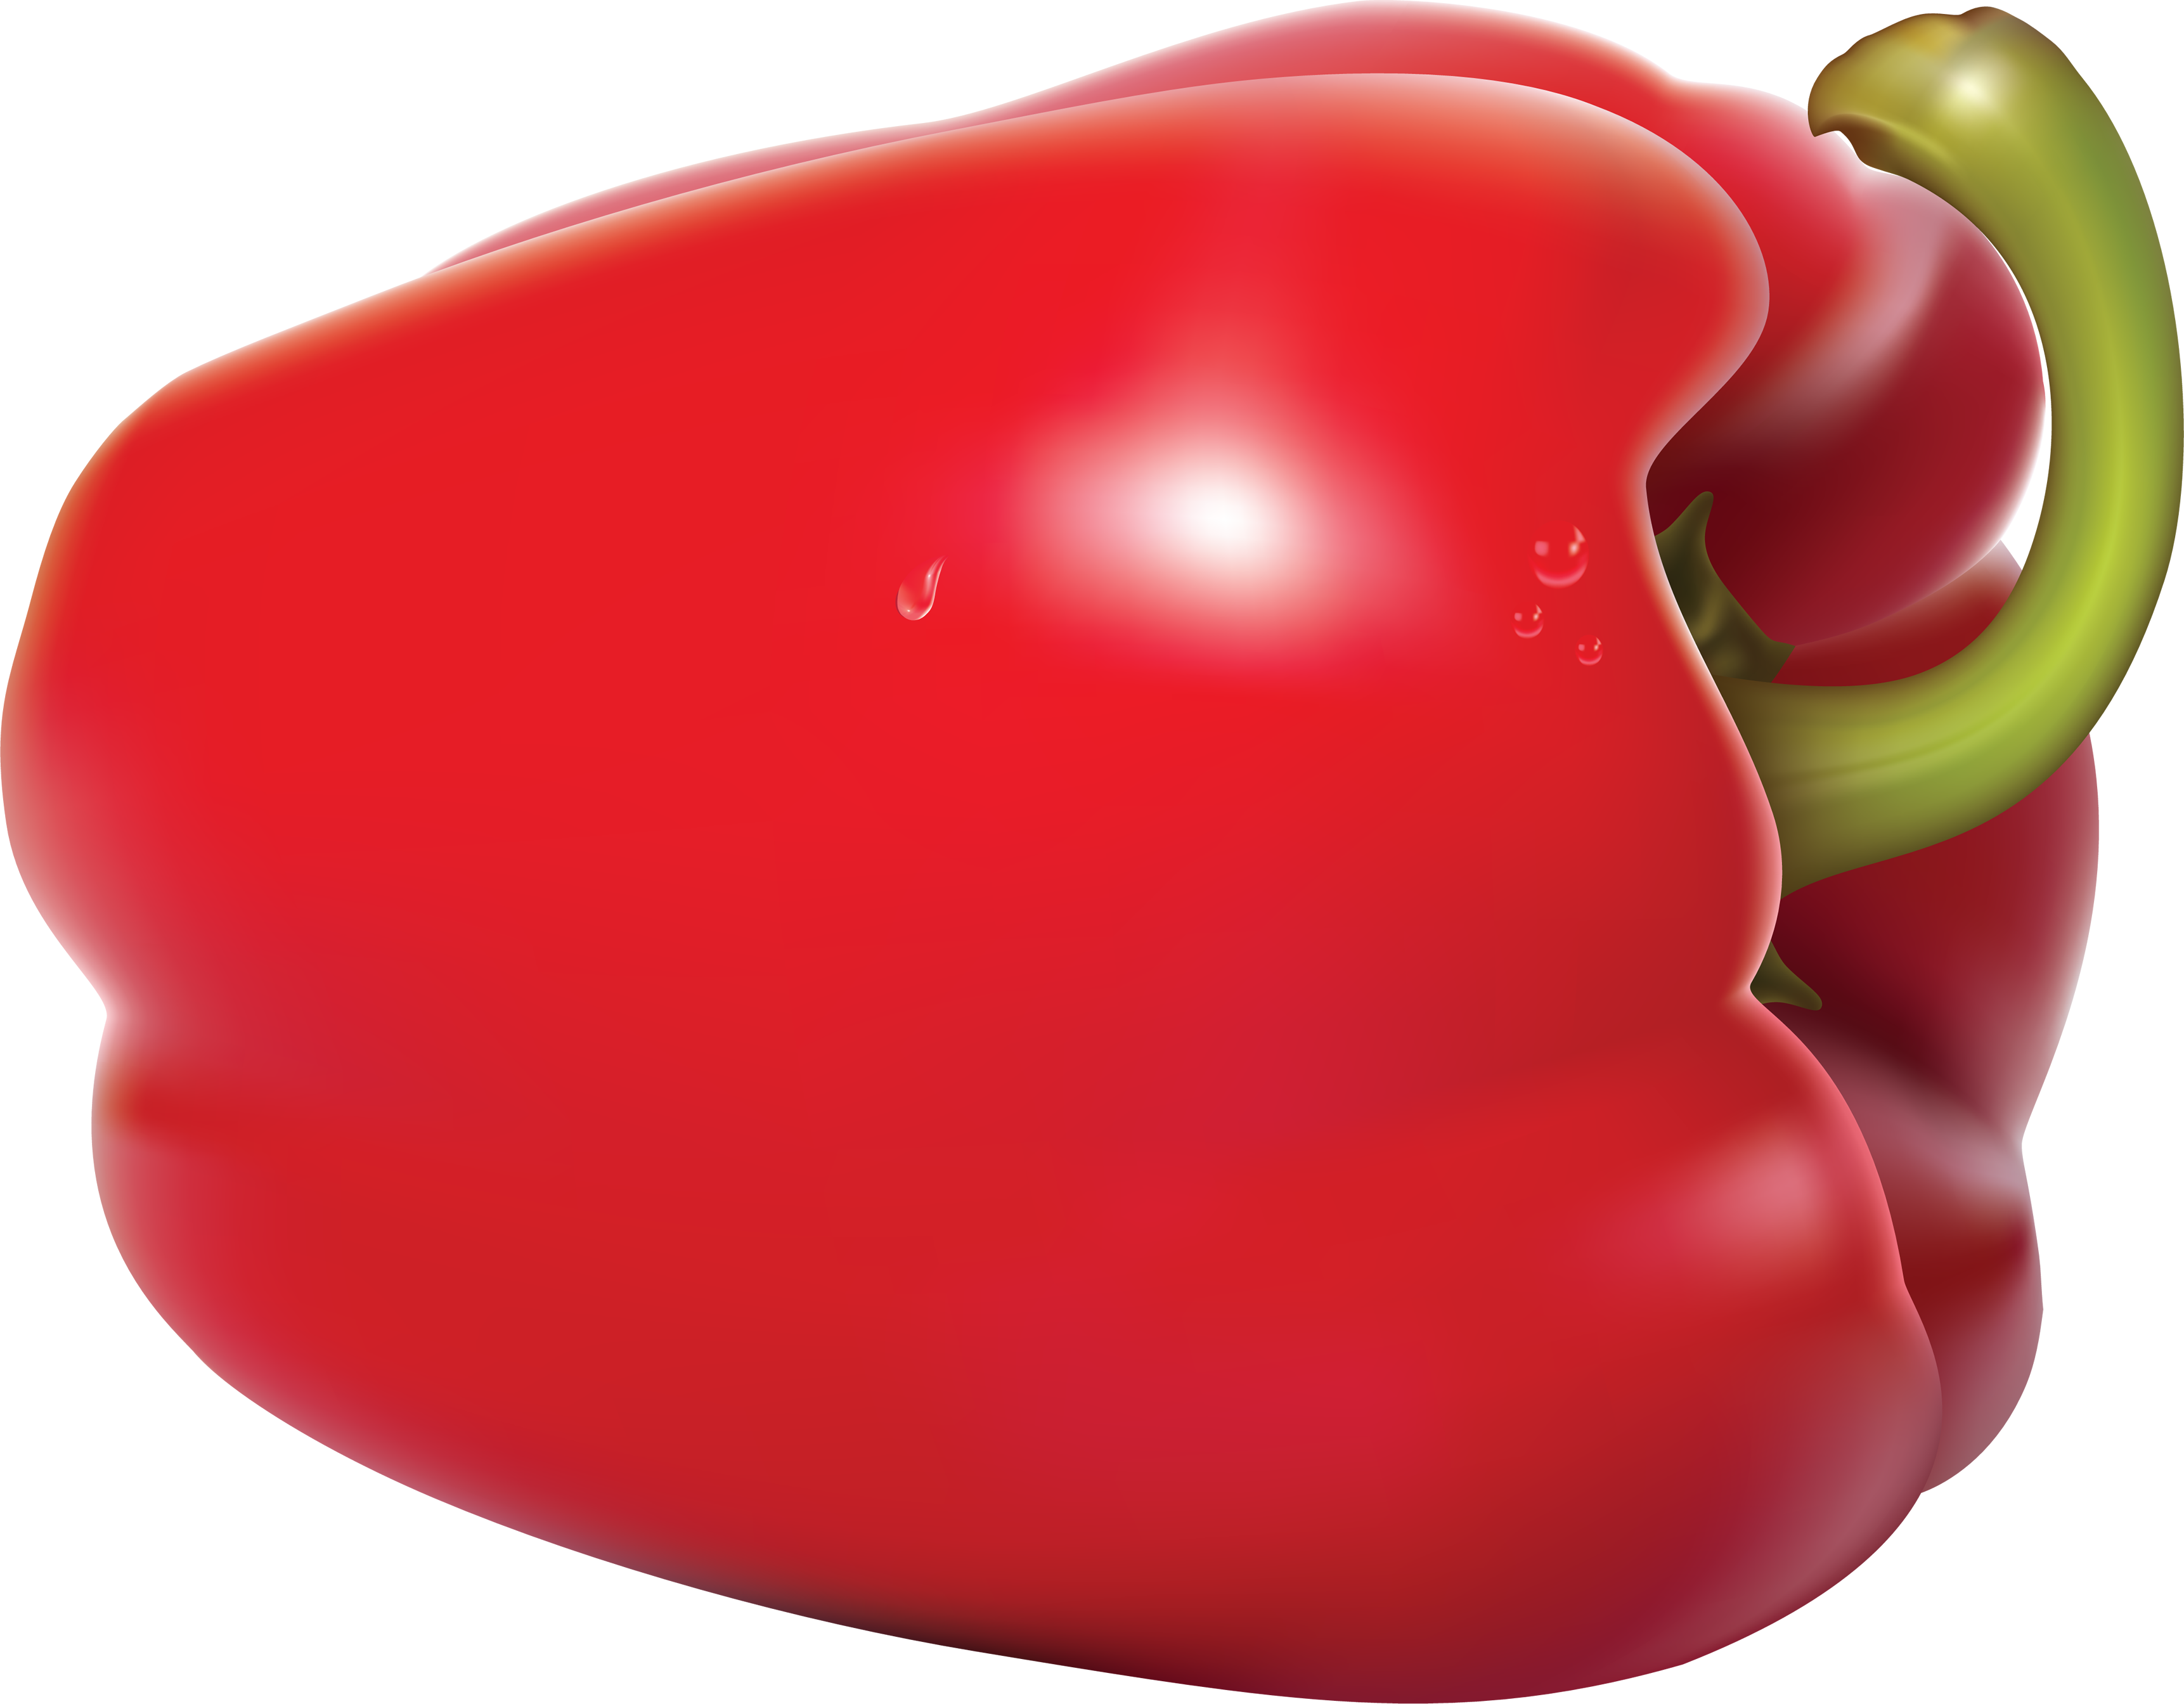 Pepper clipart sweet pepper. Red bell seven isolated